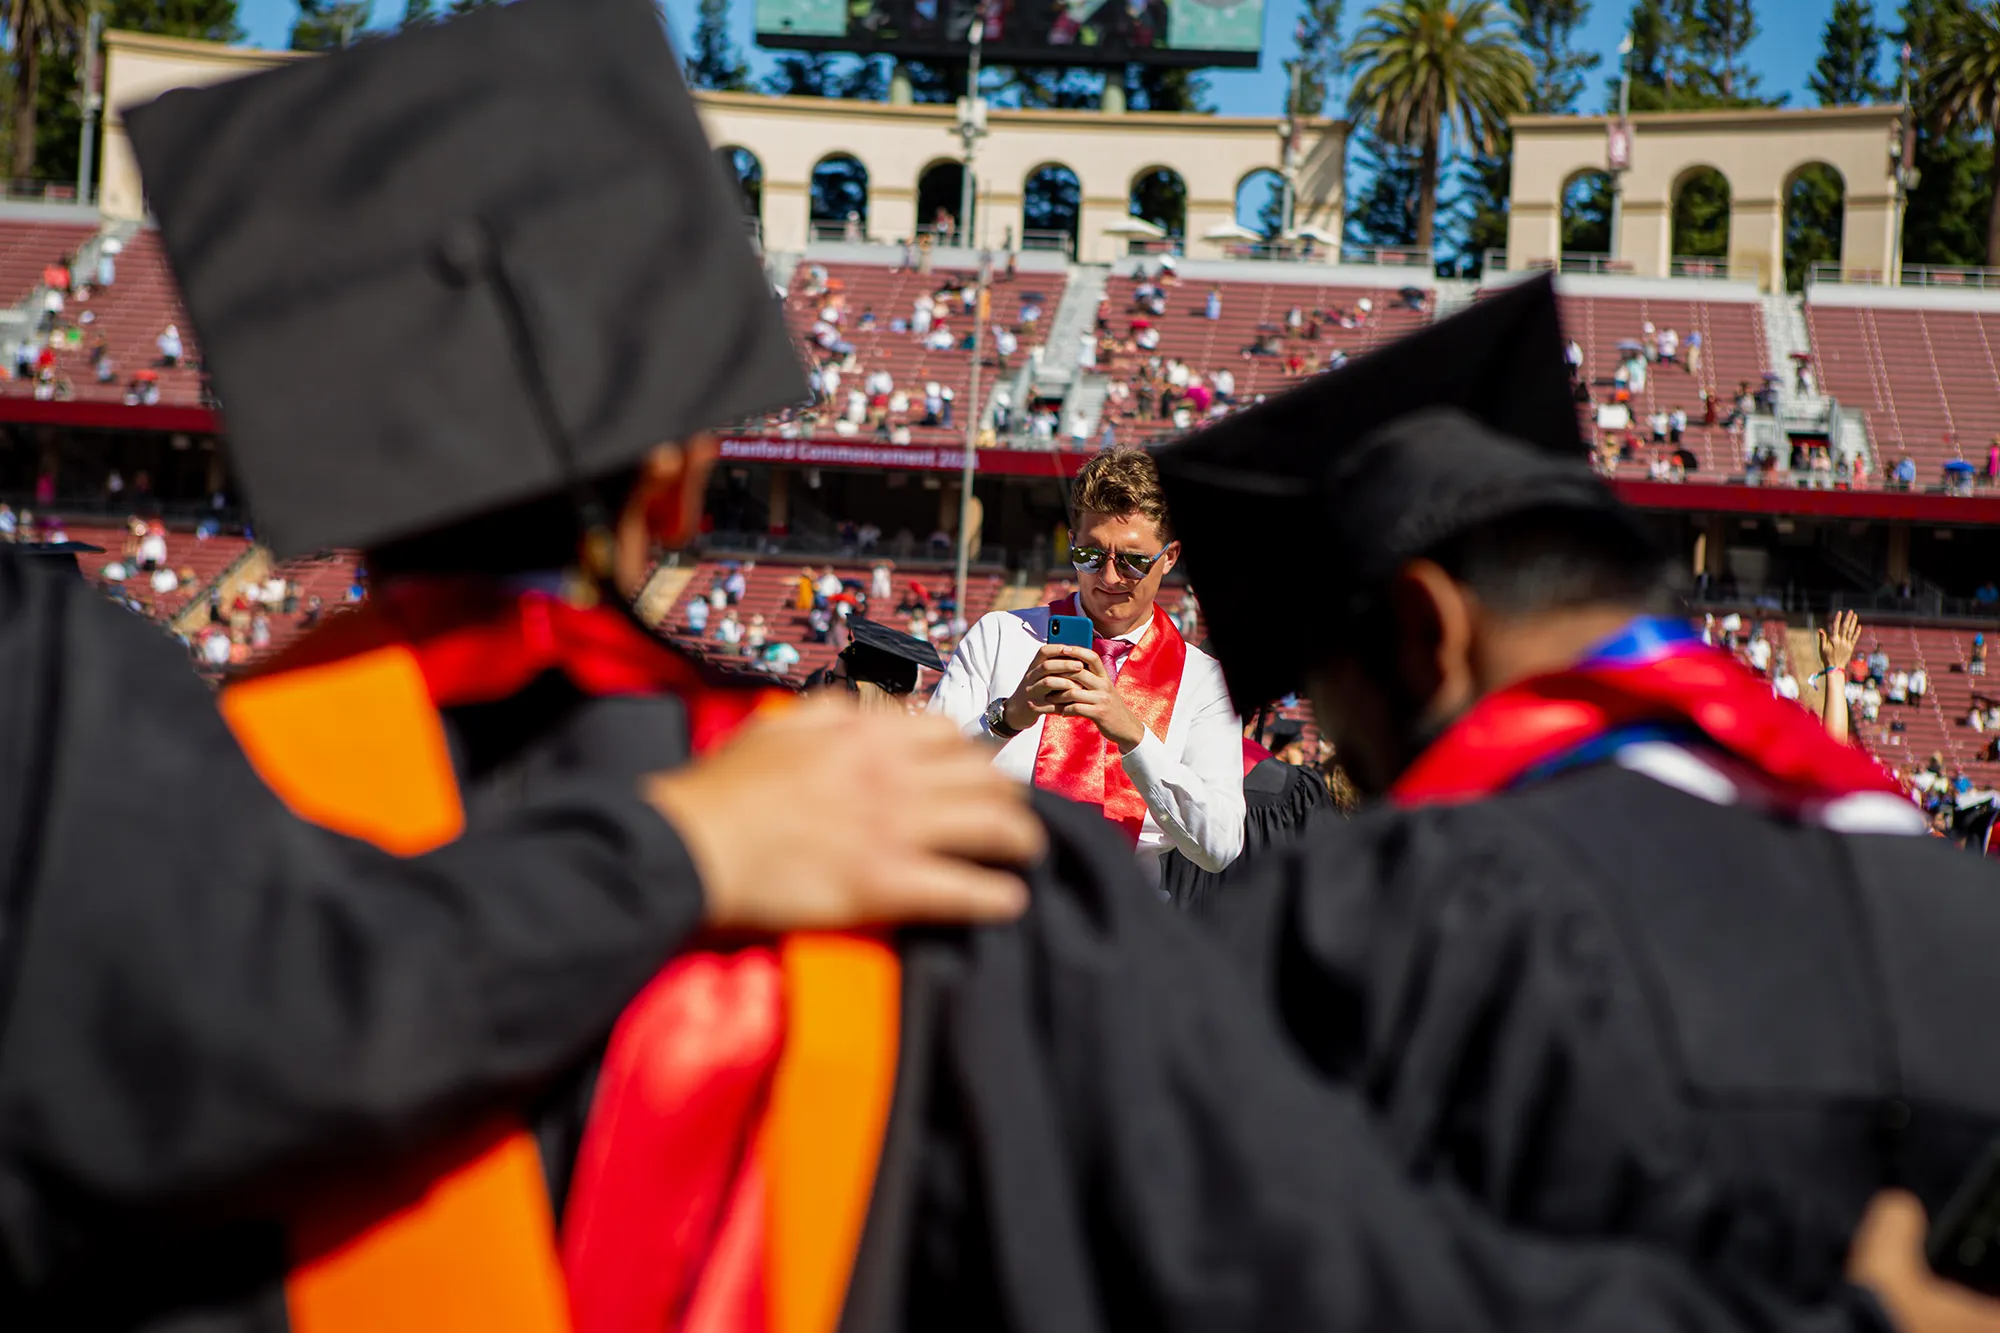 Effects of college isolation are surfacing for California’s young professionals